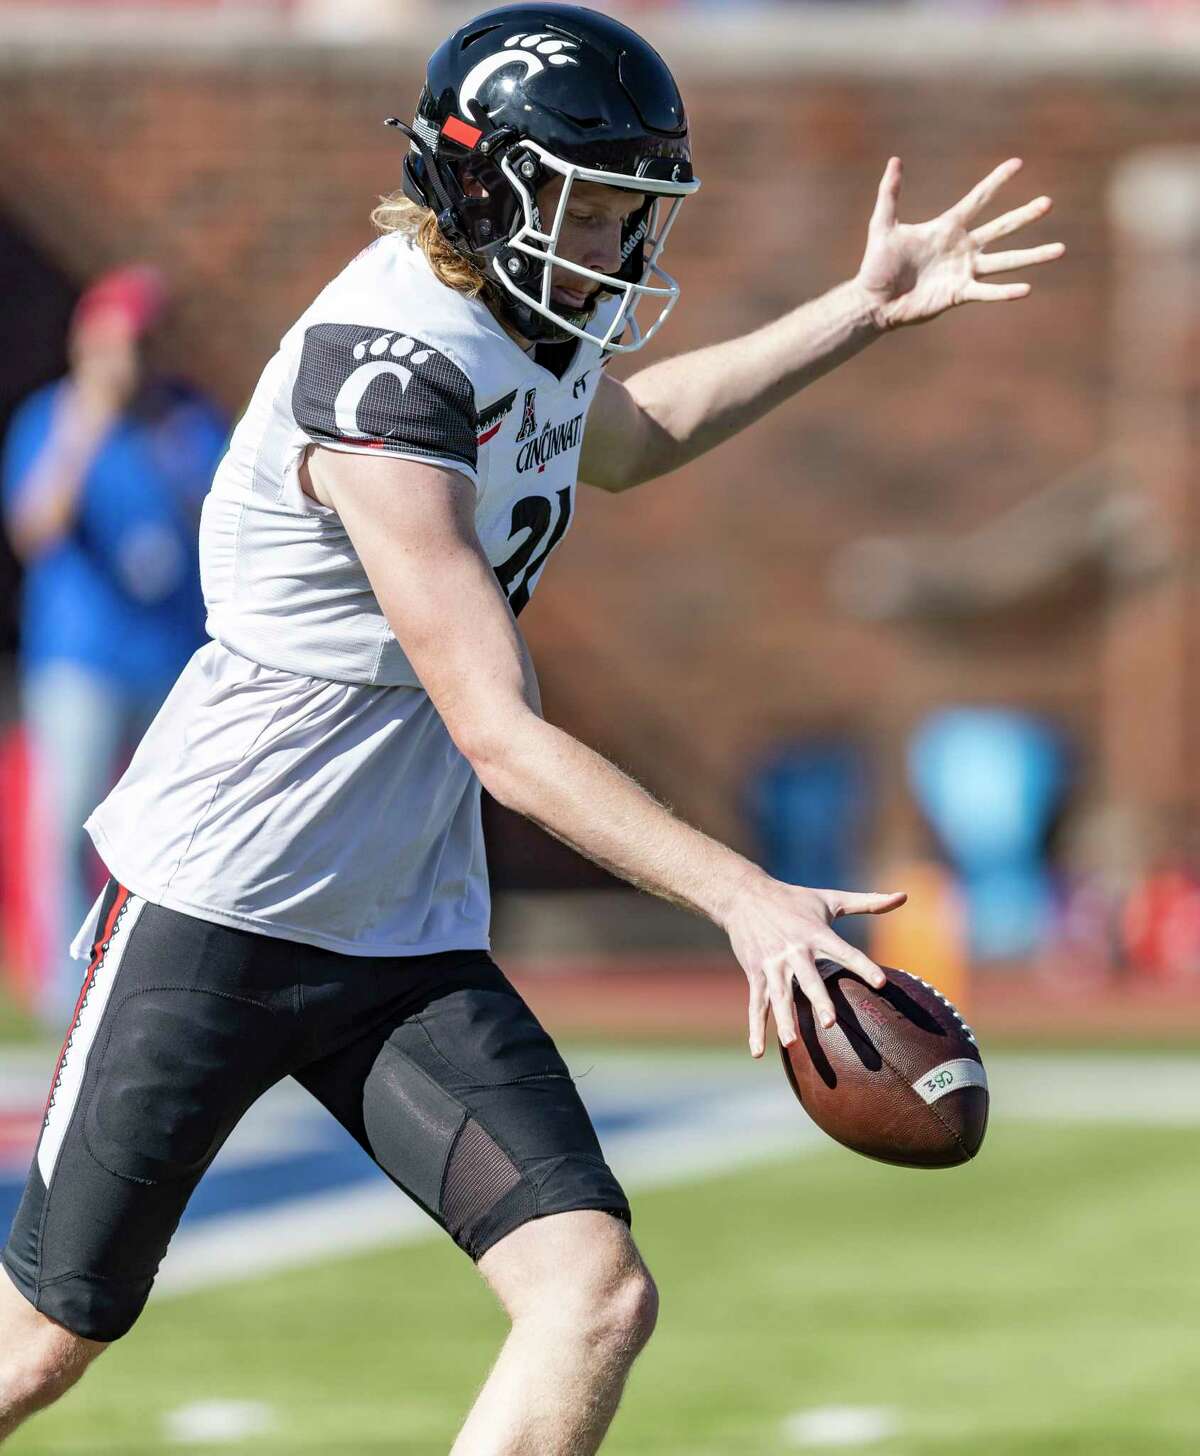 Cincinnati punter Mason Fletcher (31) punts the ball during the first half of an NCAA college football game against against SMU, Saturday, Oct. 22, 2022, in Dallas.